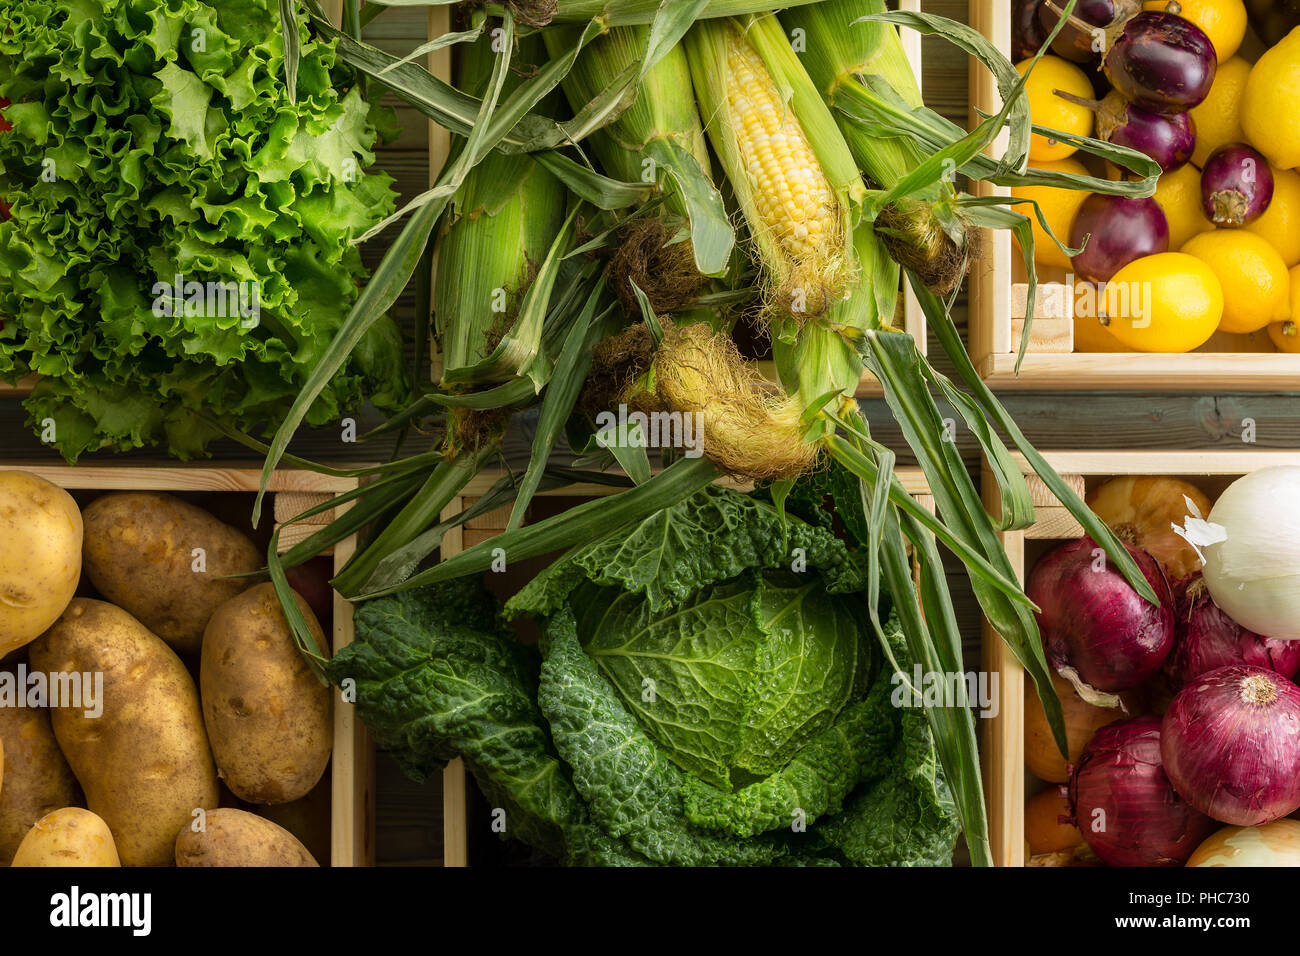 Assortment of healthy fresh raw vegetables and fruit in a wooden boxes at an organic farmers market viewed close up from above in a full frame food ba Stock Photo